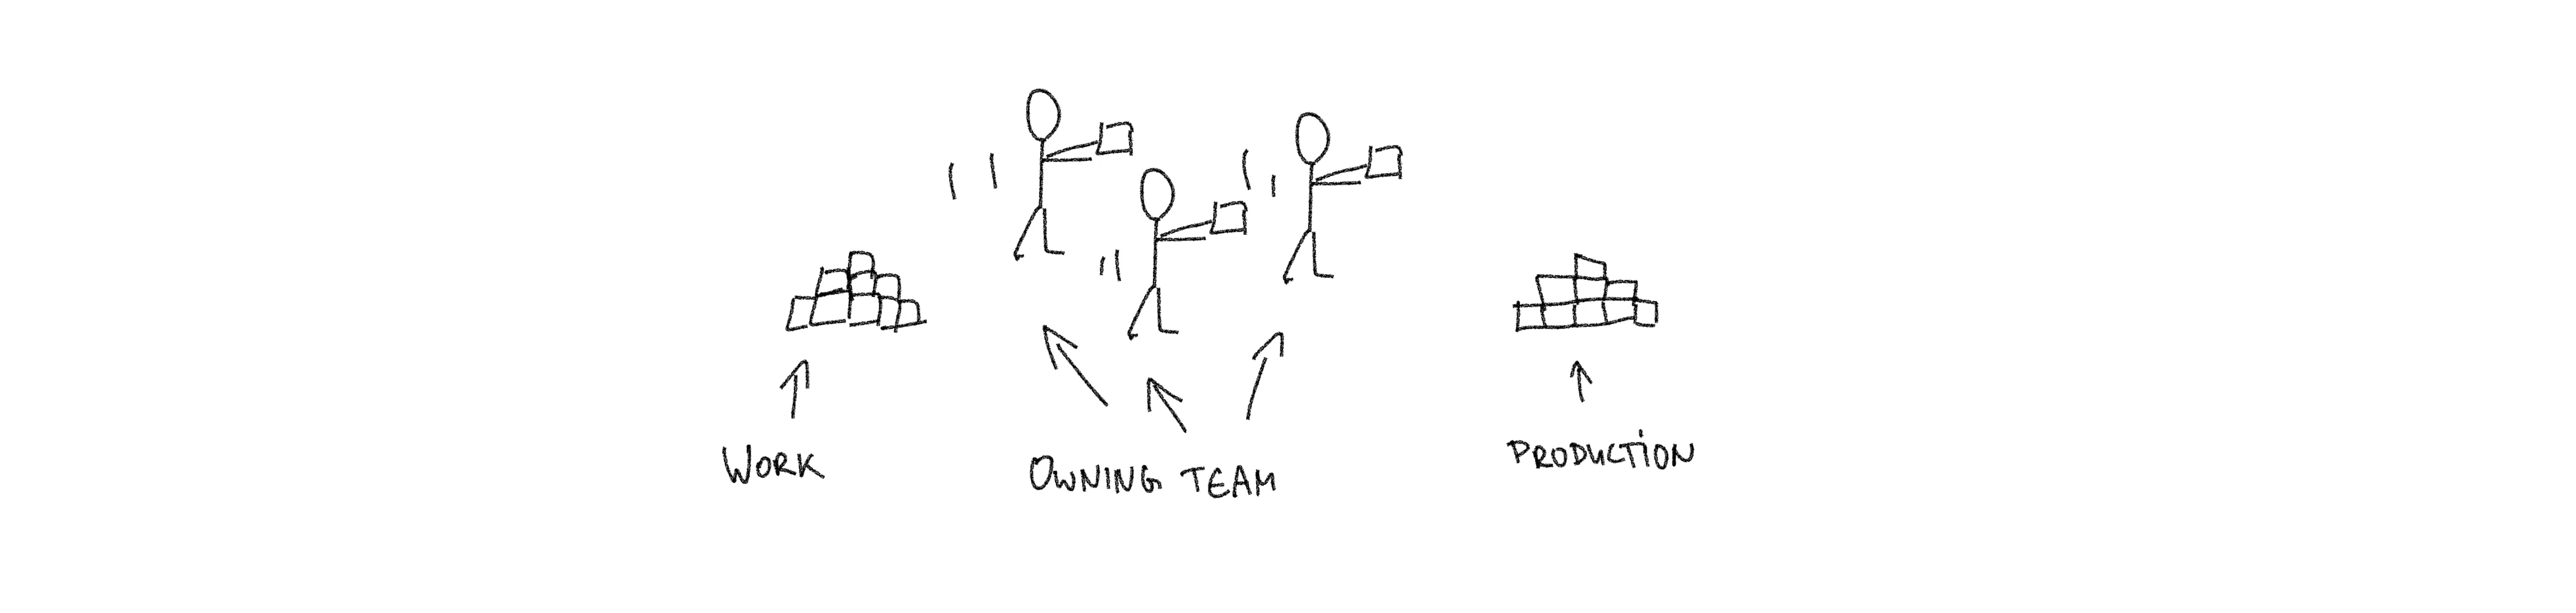 End-to-end responsible teams